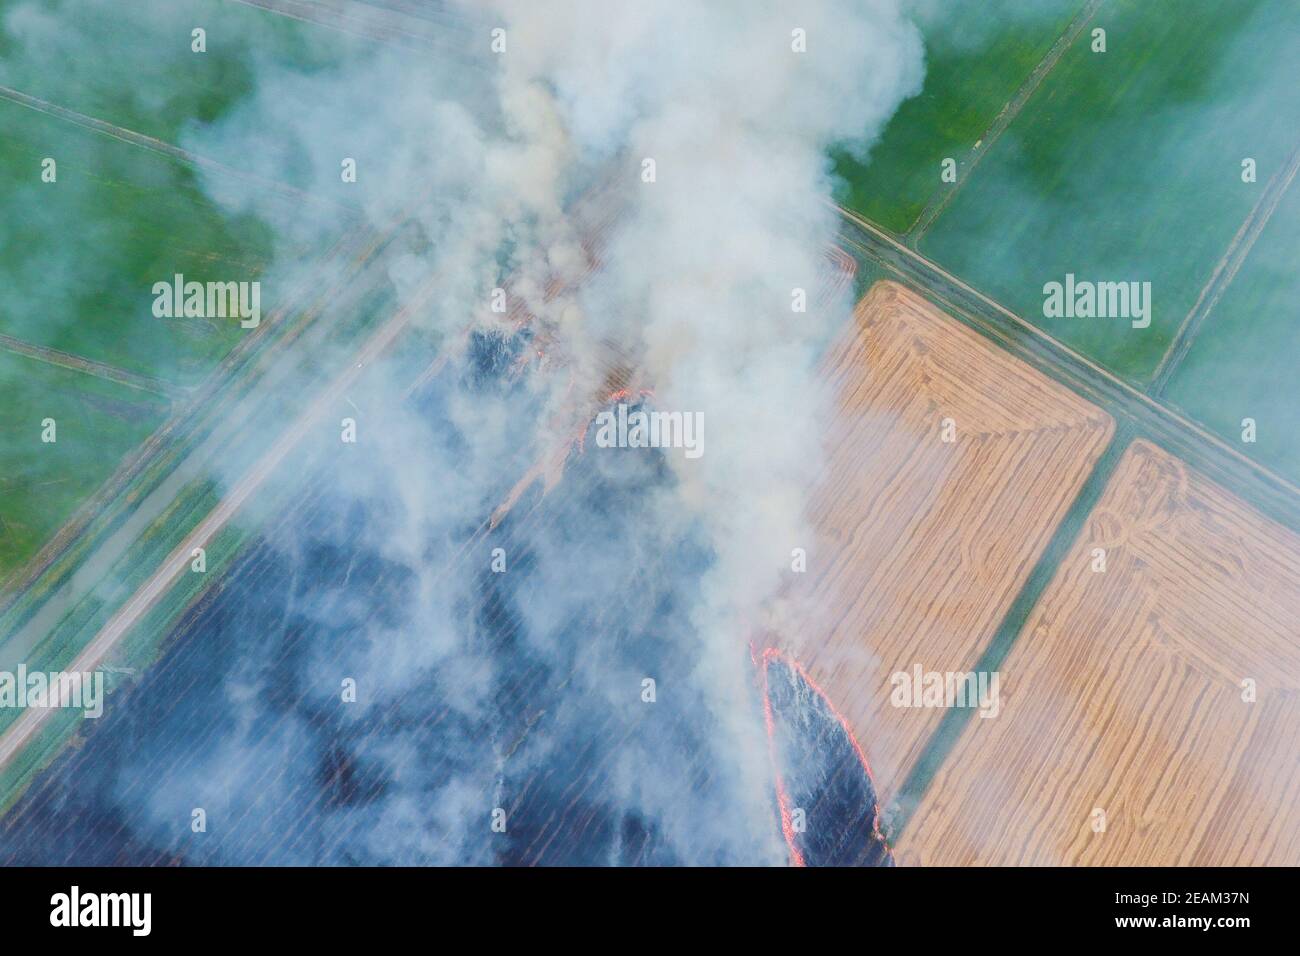 Burning straw in the fields of wheat after harvesting Stock Photo